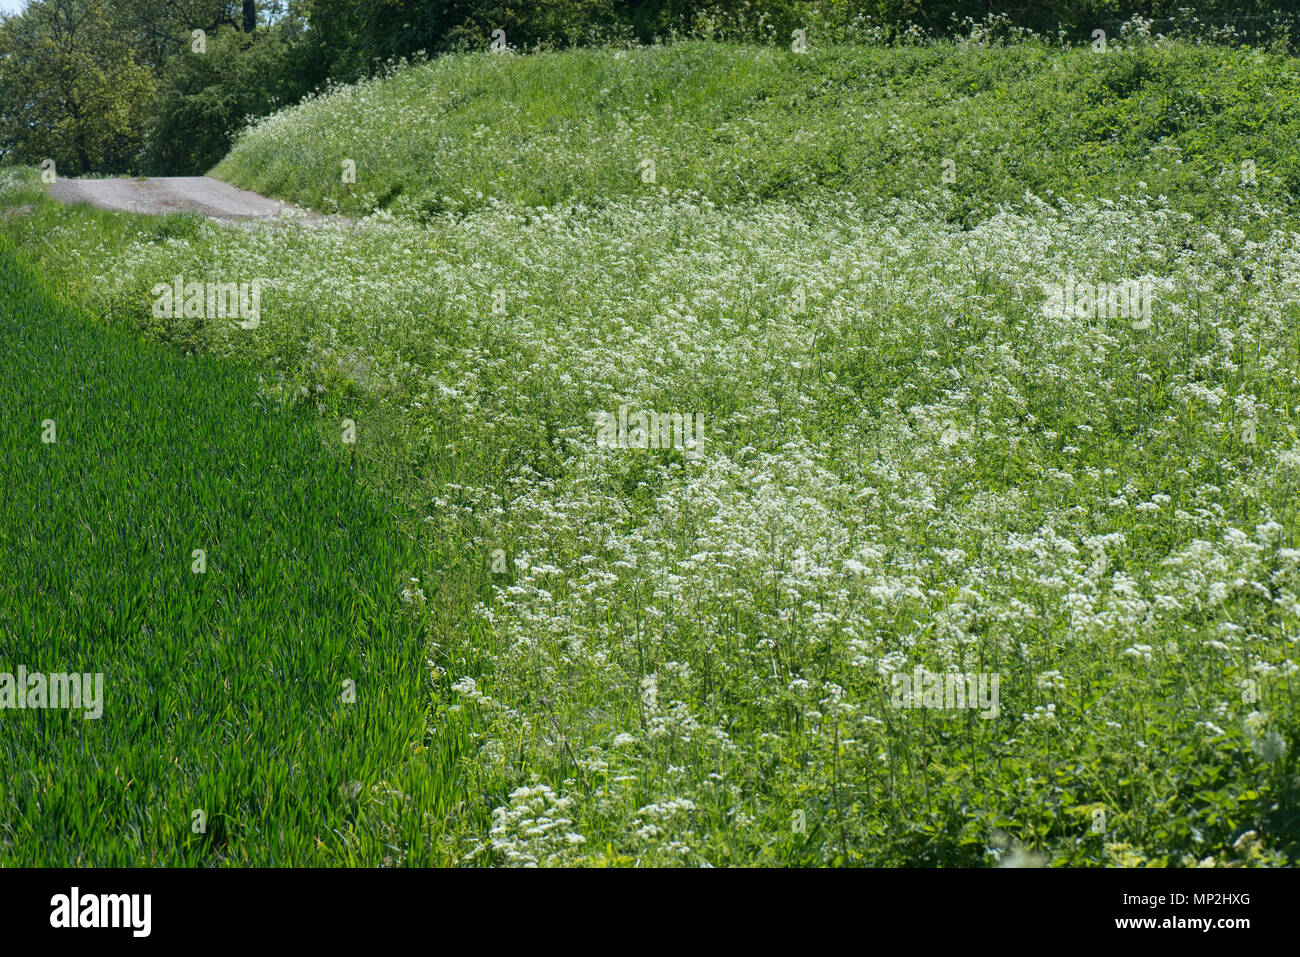 Cow parsley, Anthriscus sylvestris, flowering on a country road with hedges and trees in spring green , May Stock Photo